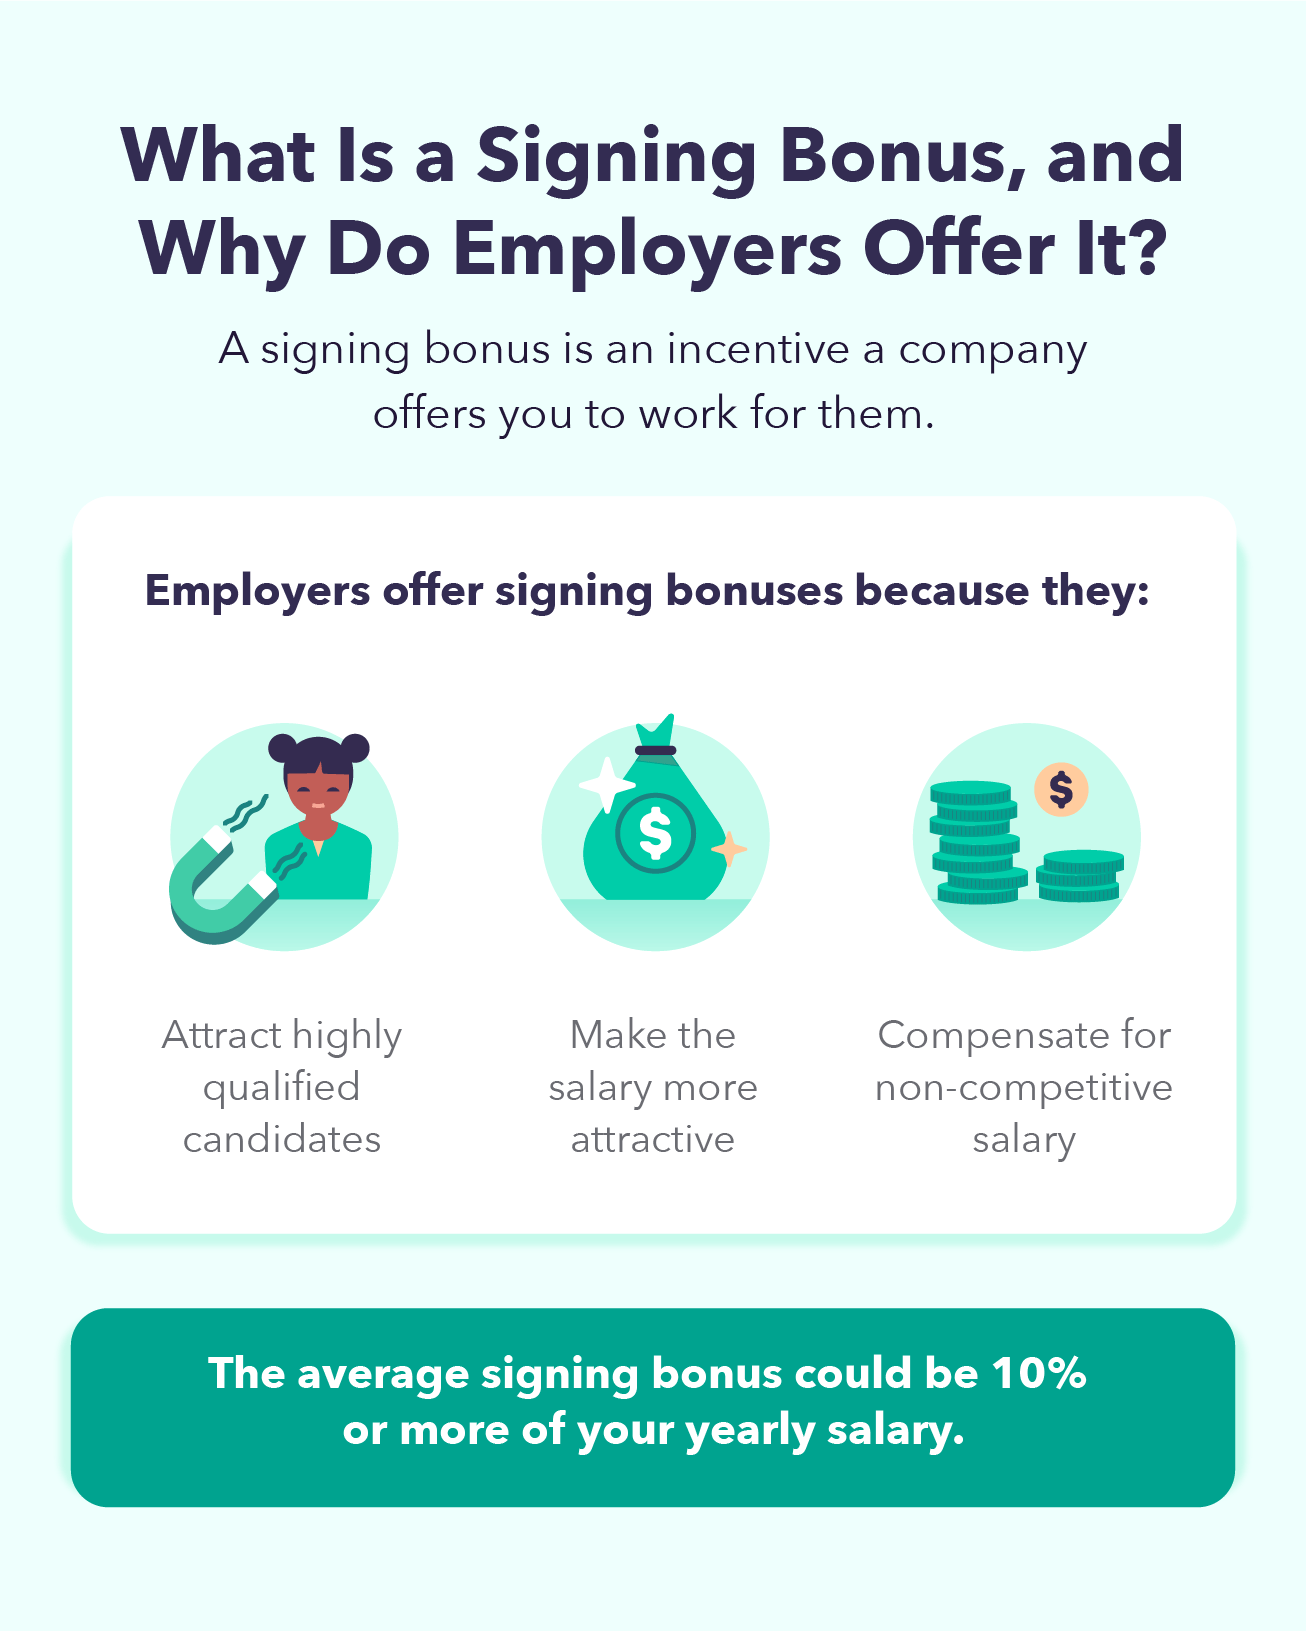 How To Ask For a Signing Bonus + Tips to Negotiate Incentives